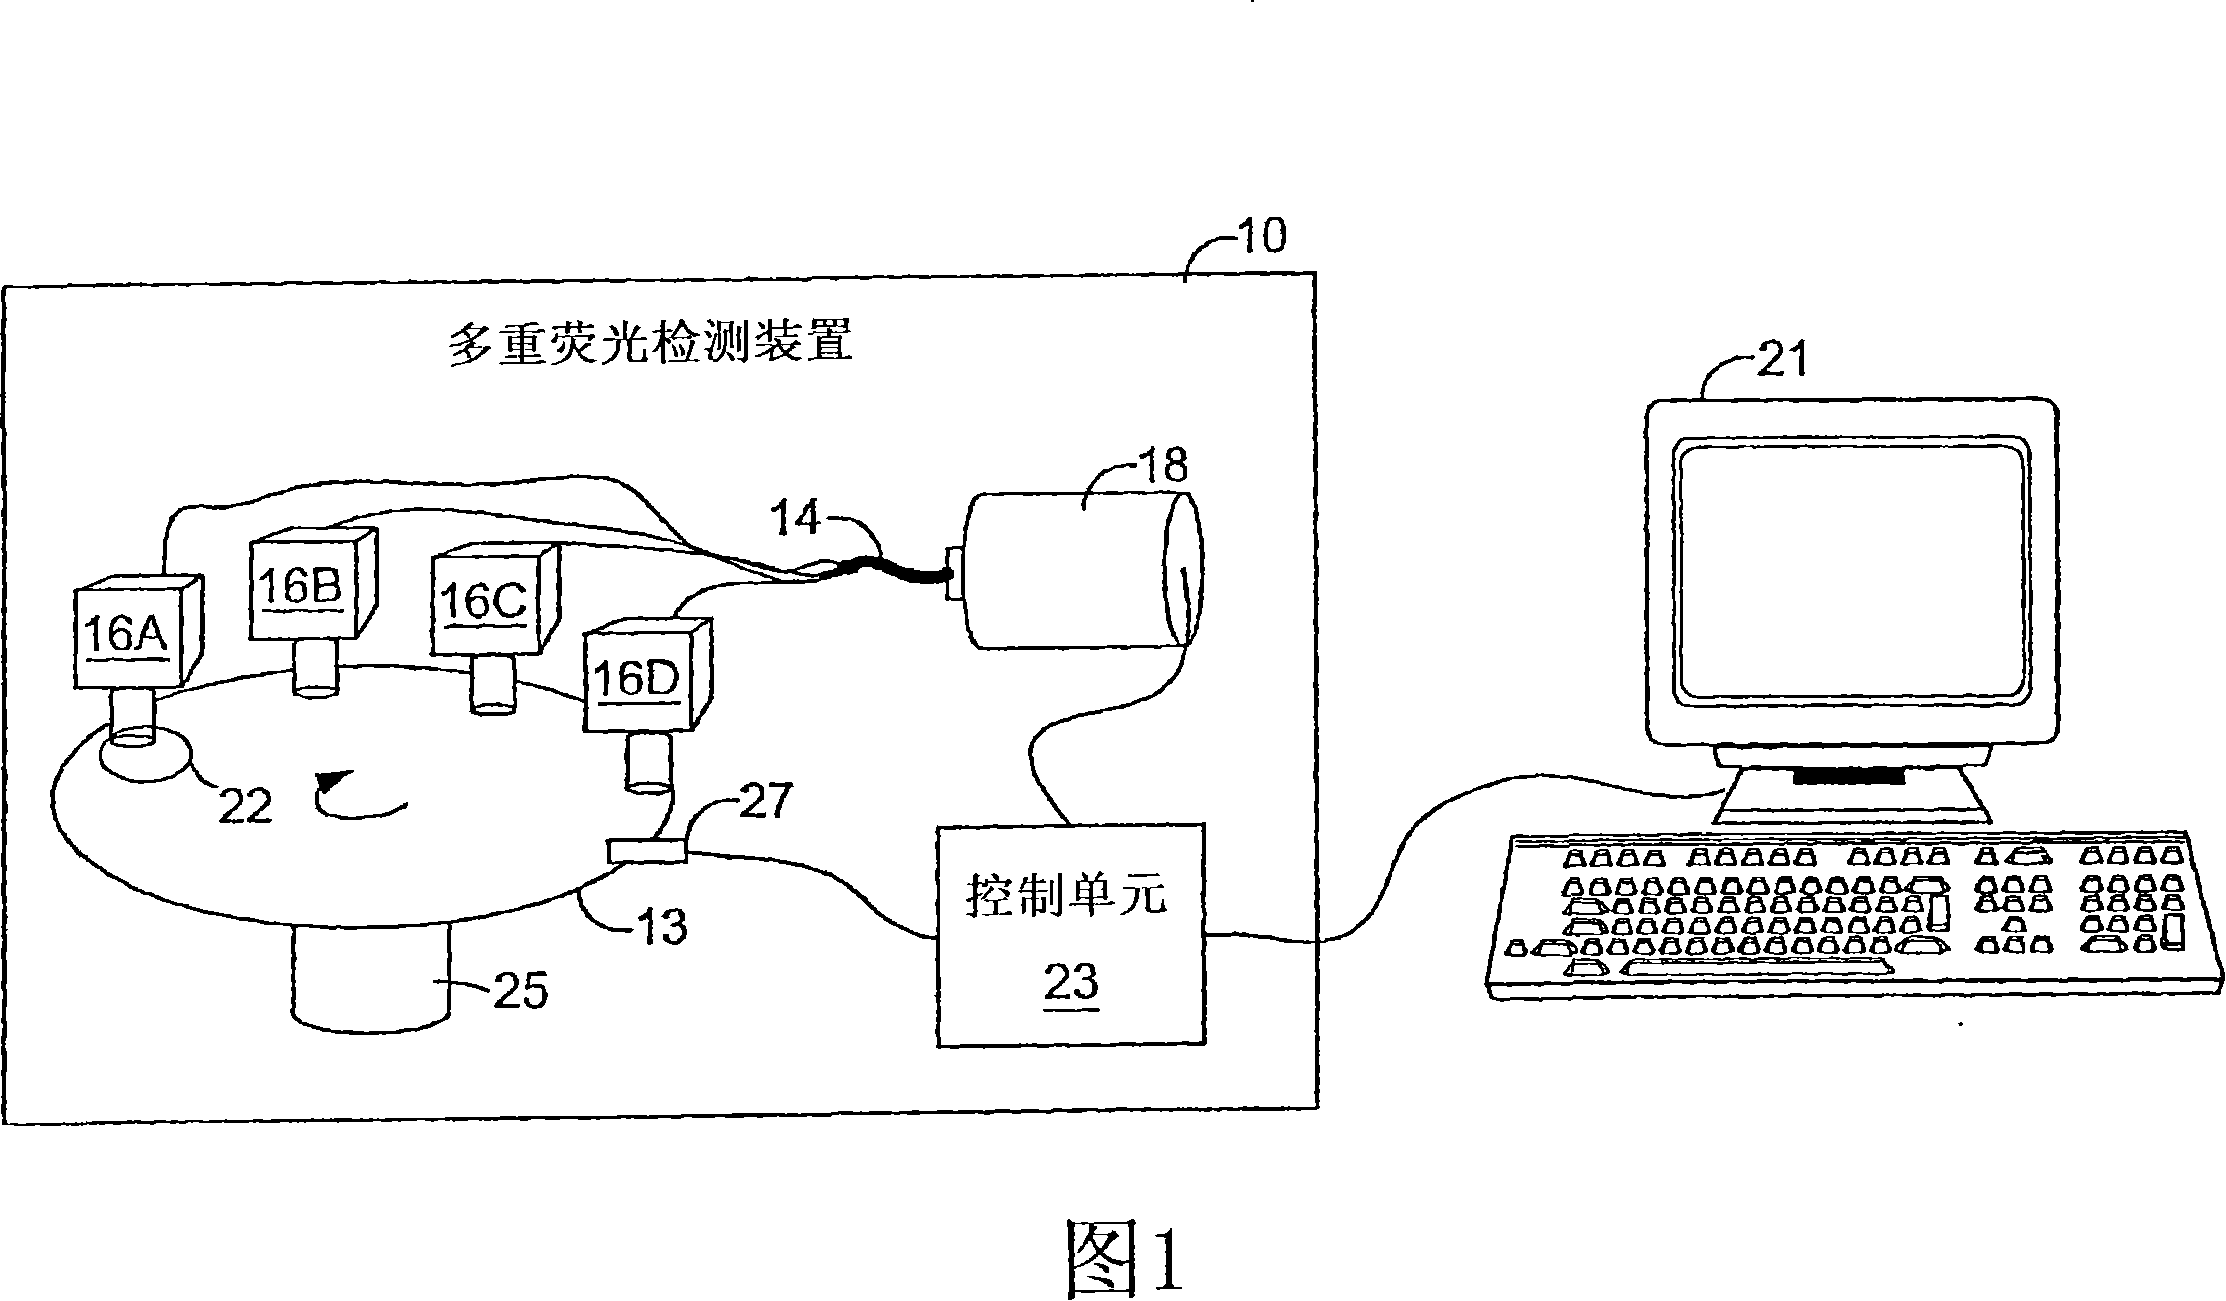 Multiplex fluorescence detection device having removable optical modules